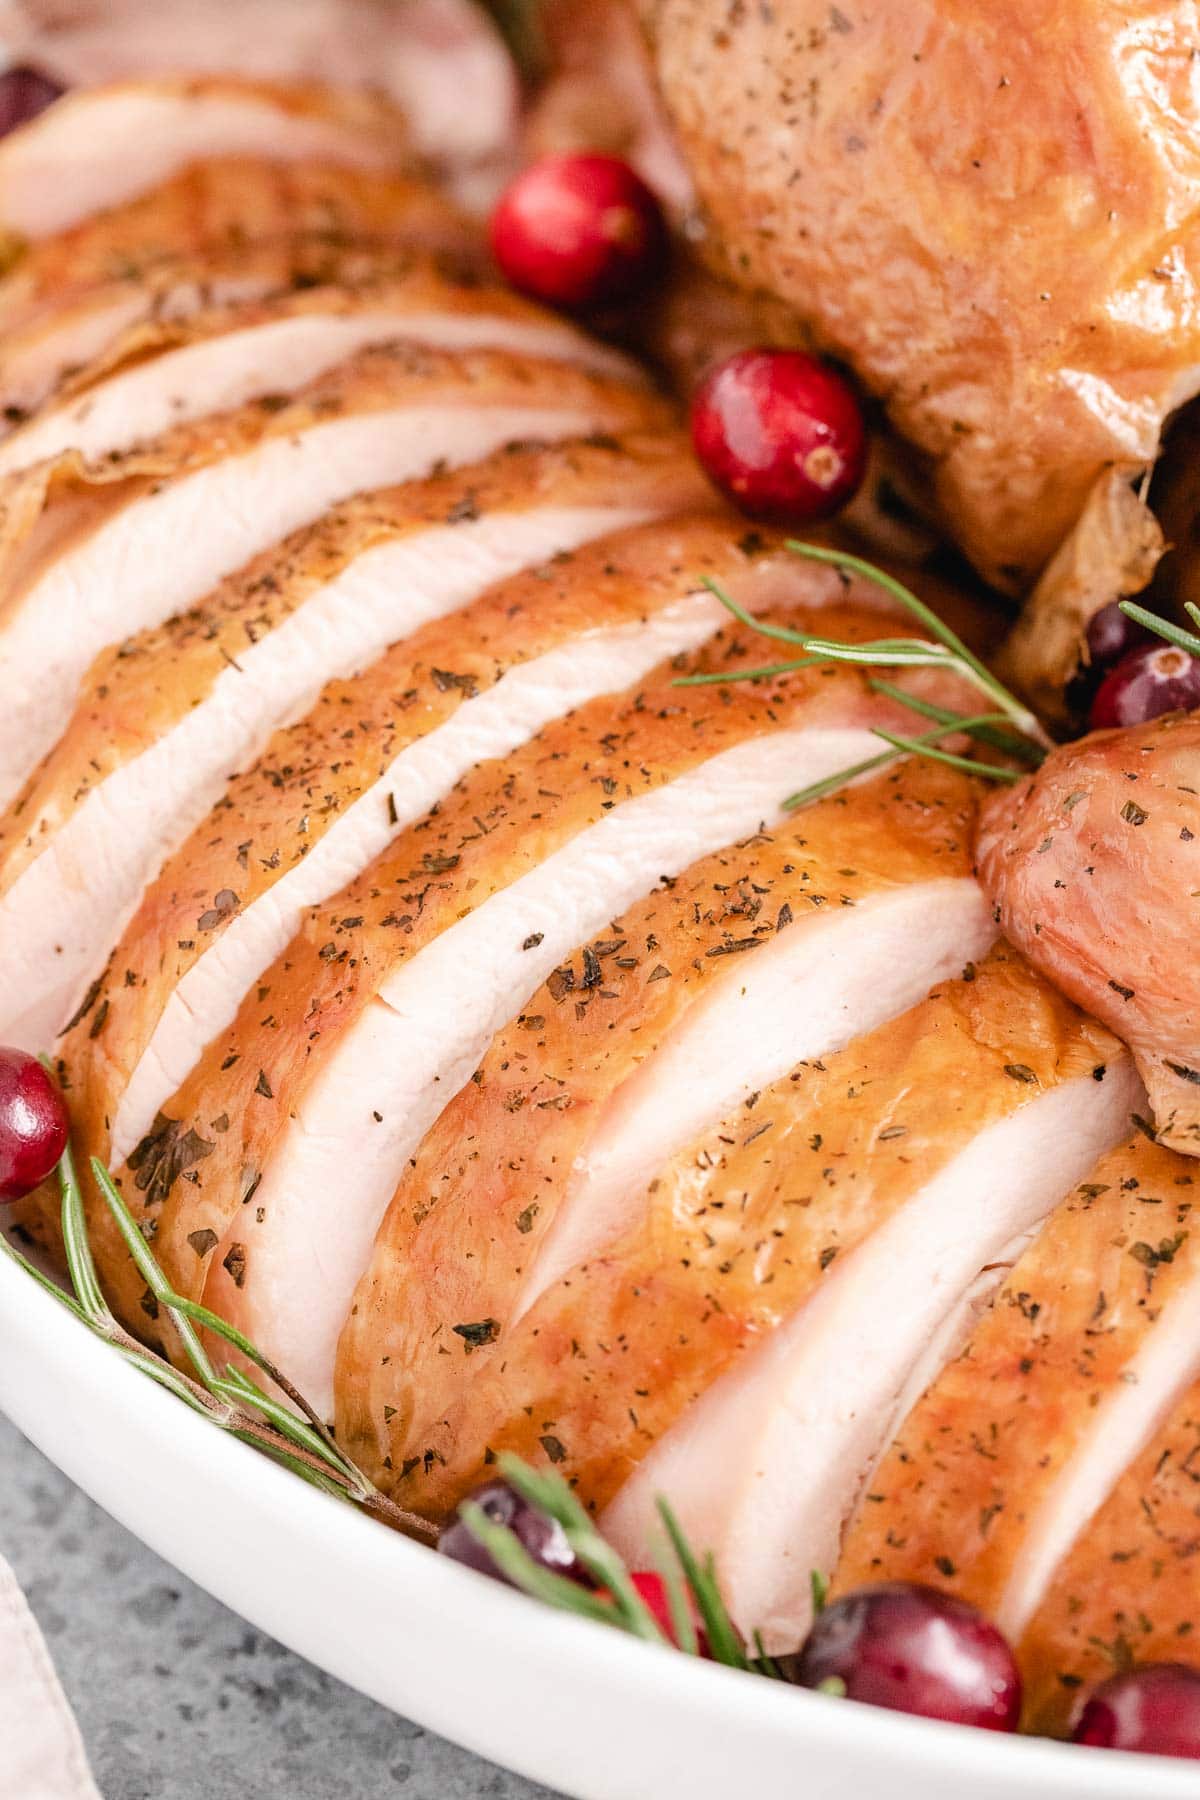 A close up of a sliced turkey breast with the skin on garnished with cranberries and rosemary